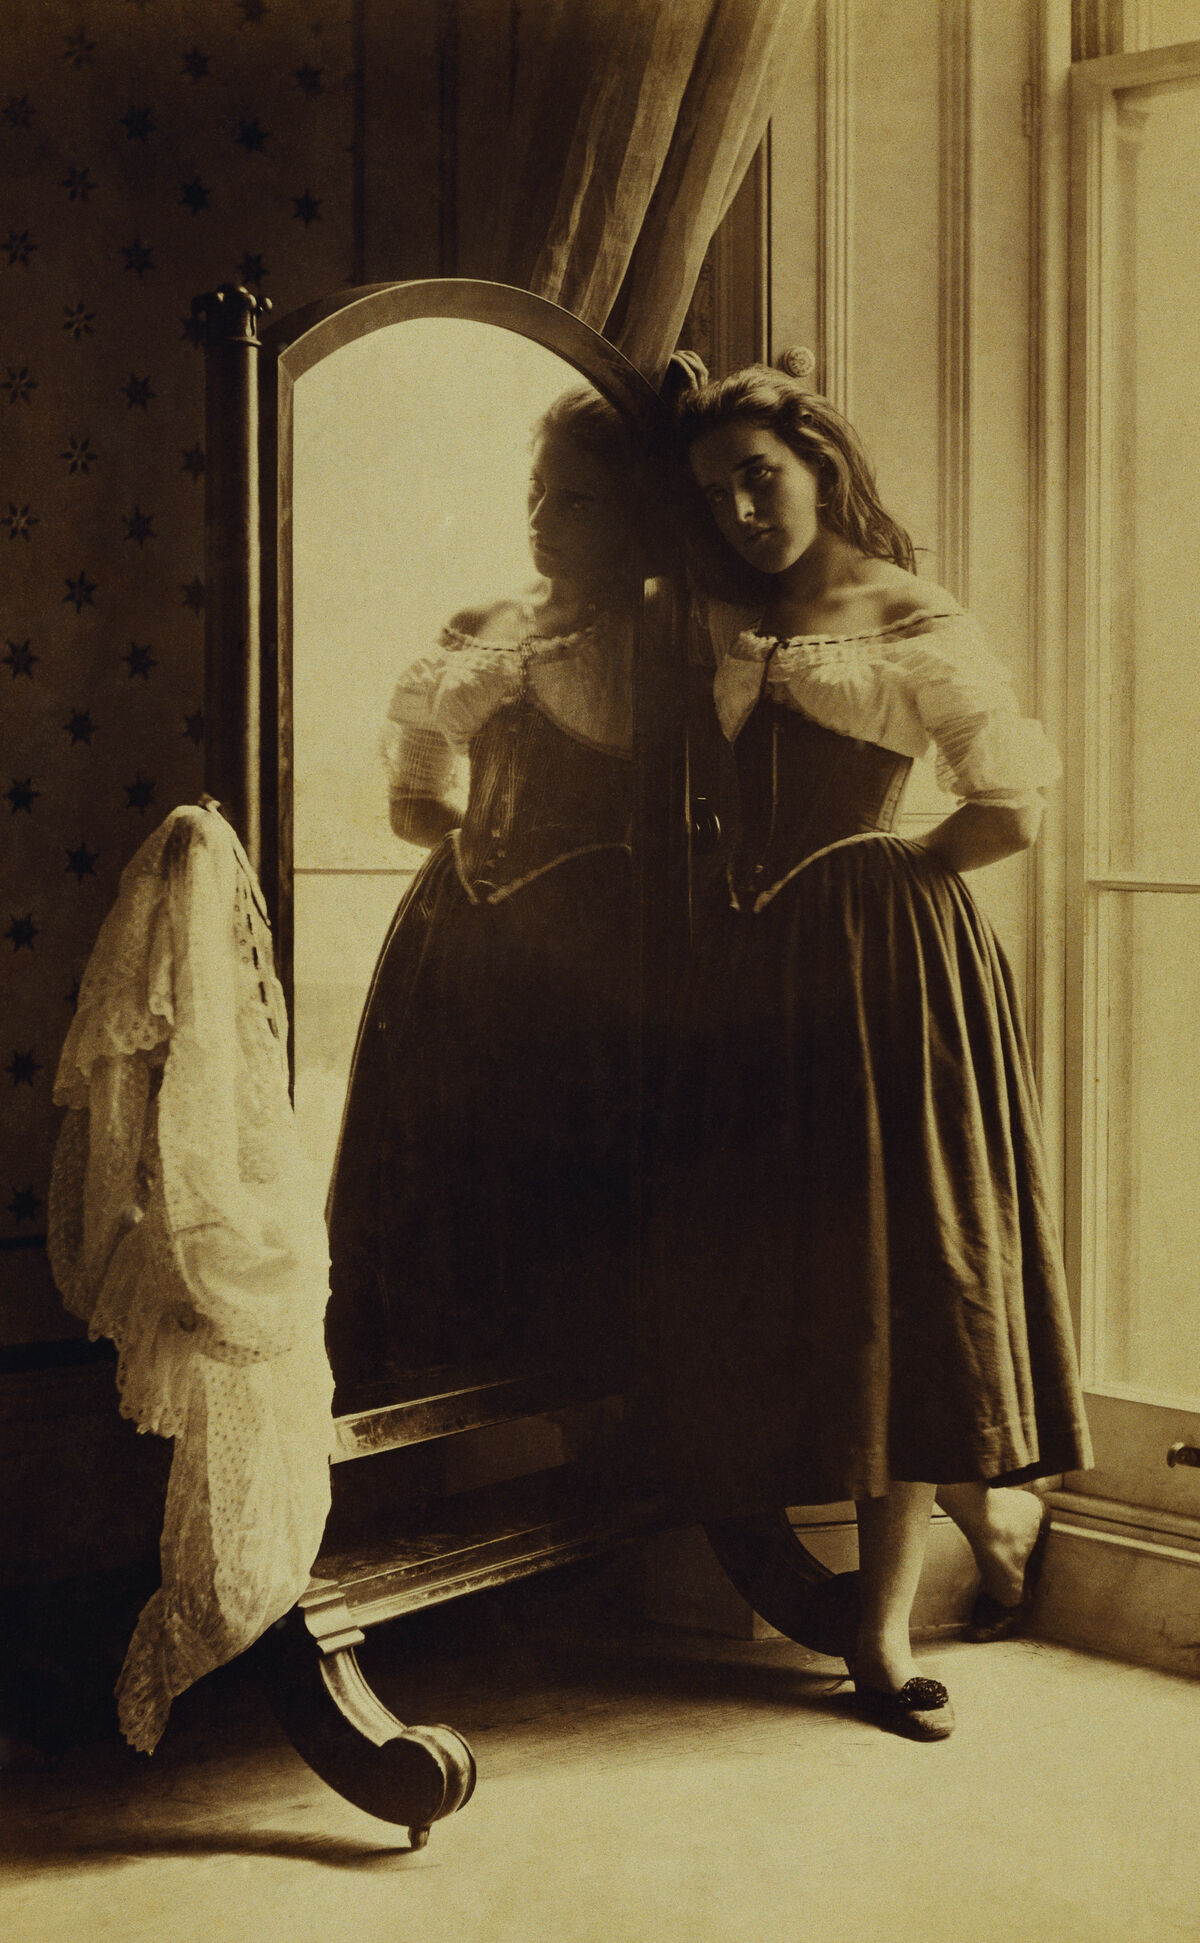 Lady Clementina Hawarden, Woman at a Mirror, 1900. © Historical Picture Archive/CORBIS/Corbis via Getty Images.